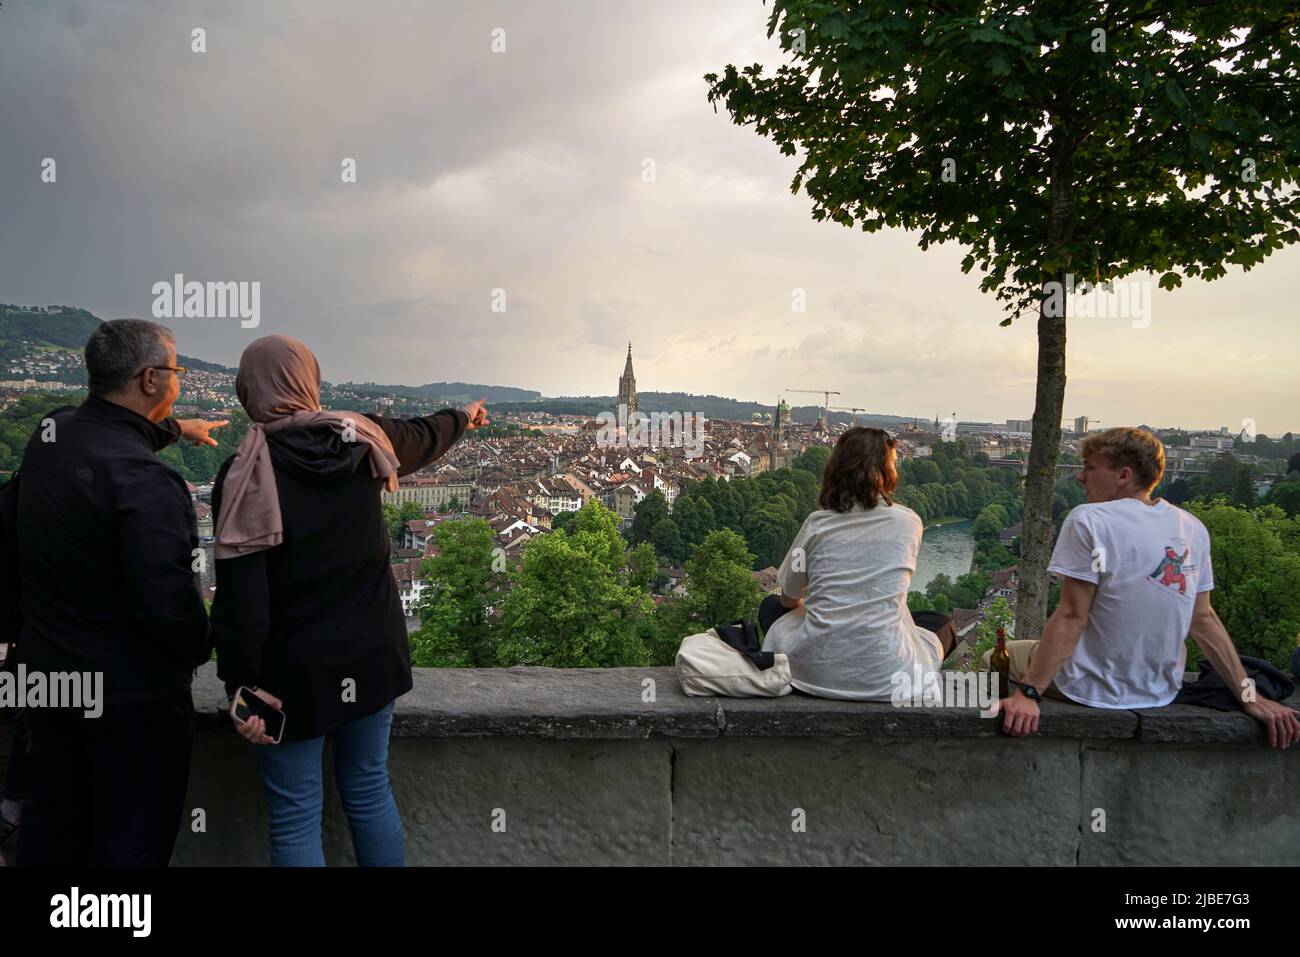 People admiring the splendid panoramic view of the old city of Berne from above. Bern, Switzerland - June 2022 Stock Photo